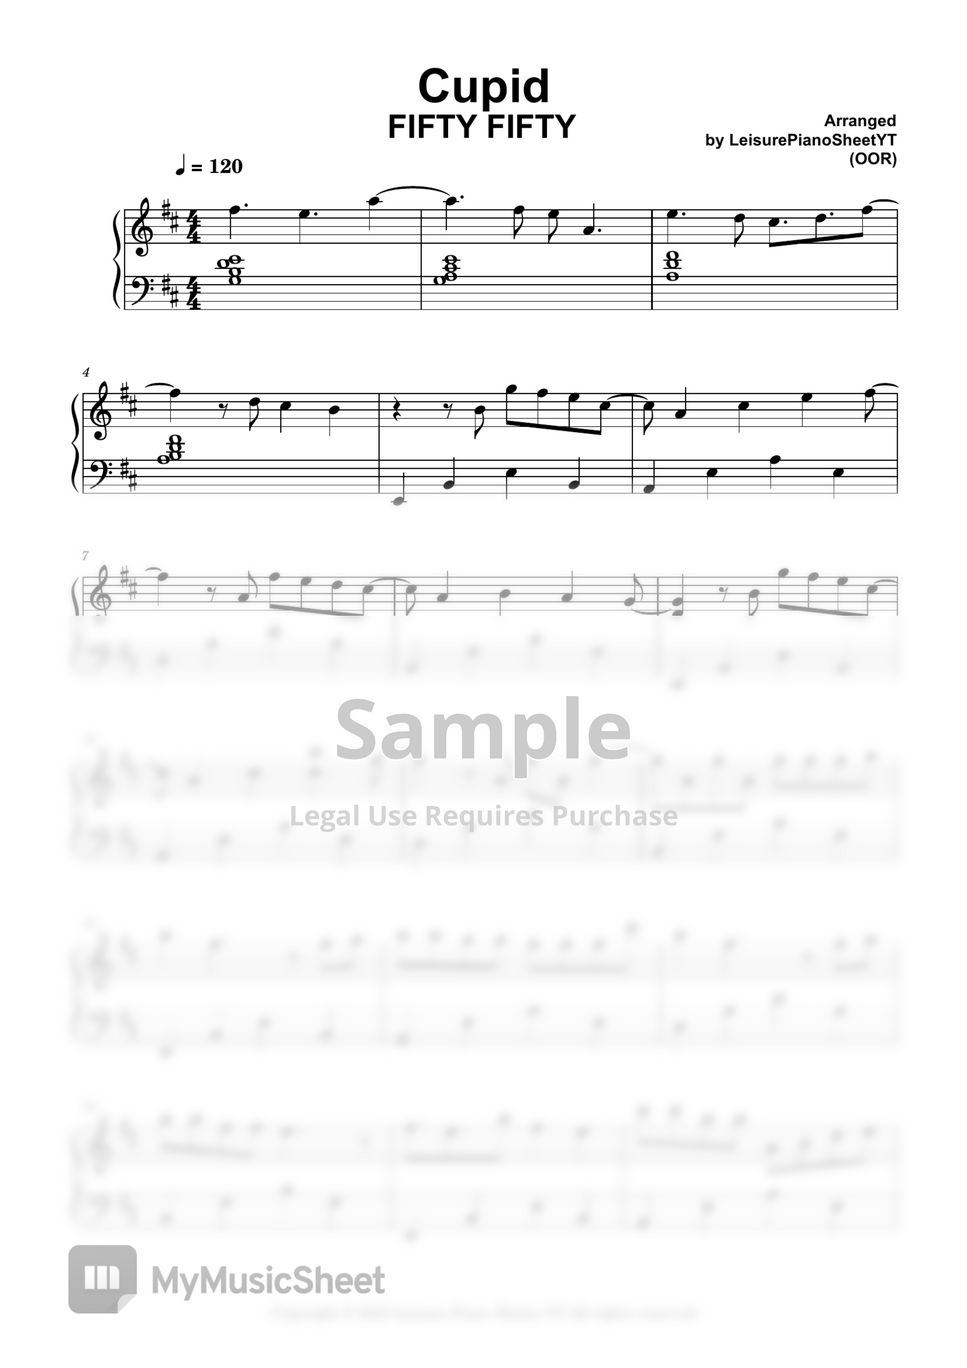 FIFTY FIFTY - Cupid by Leisure (OOR) Piano Sheets YT